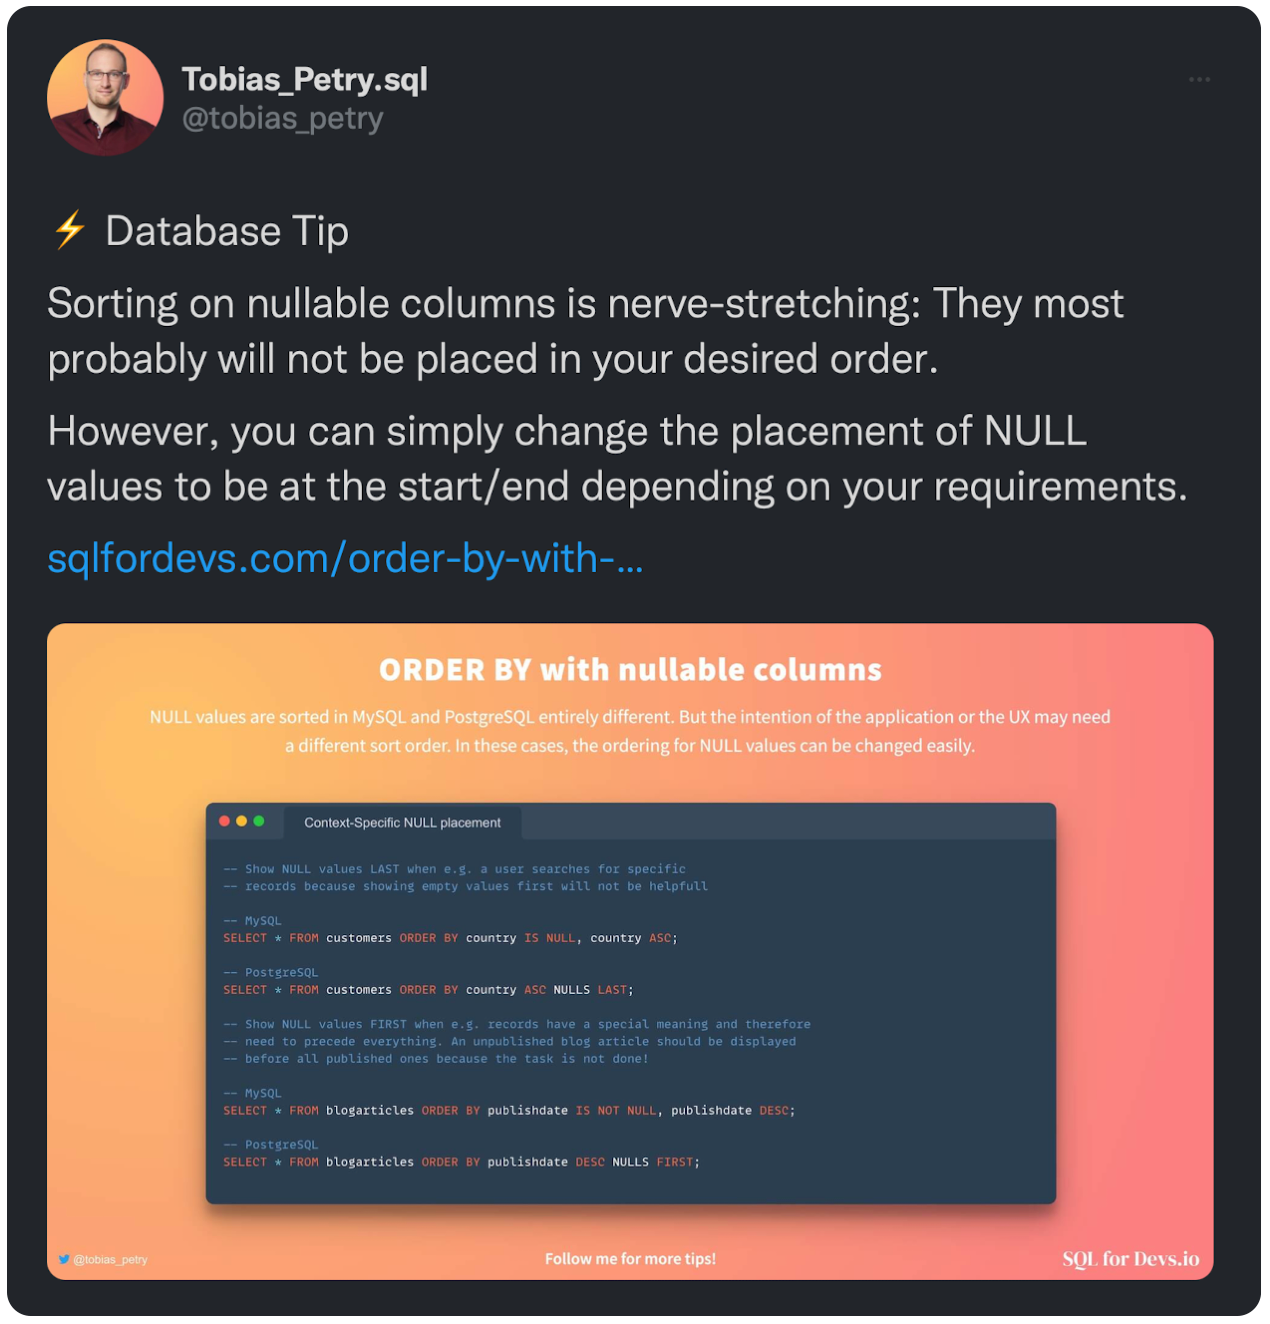 ⚡️ Database Tip Sorting on nullable columns is nerve-stretching: They most probably will not be placed in your desired order. However, you can simply change the placement of NULL values to be at the start/end depending on your requirements. 